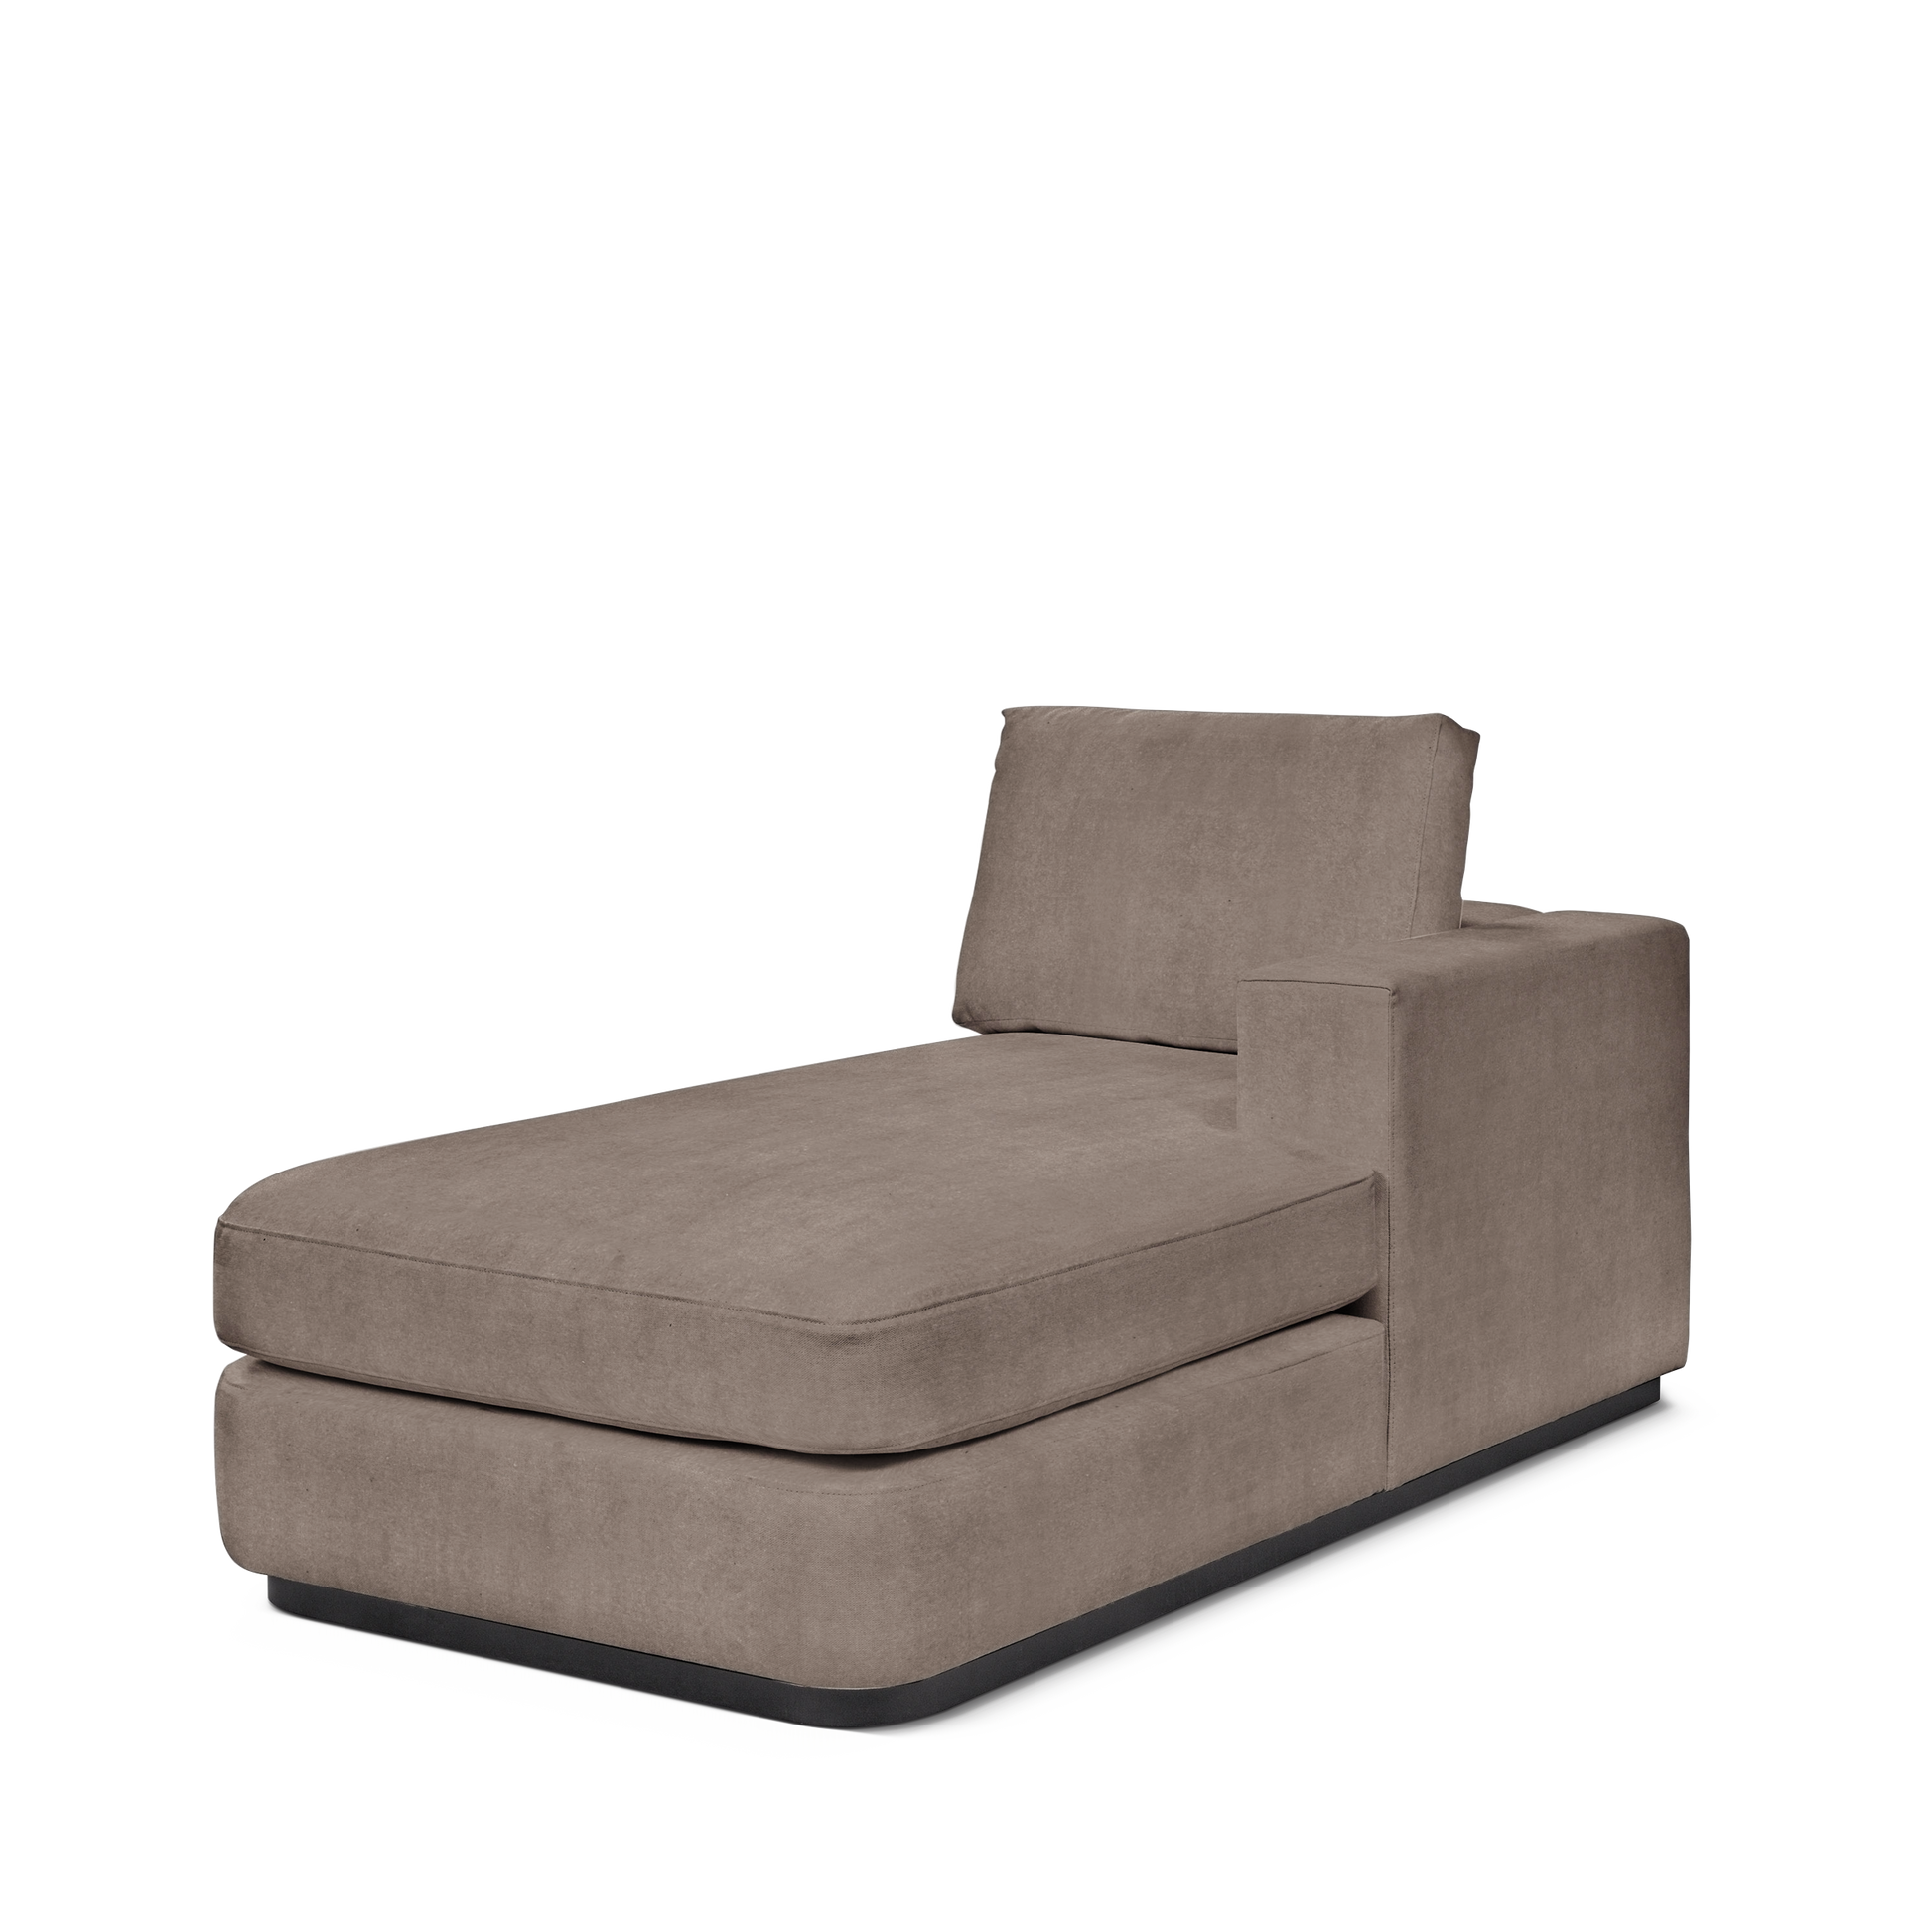 ATLAS 90 Lounge Bed arm rest right with London grey textile